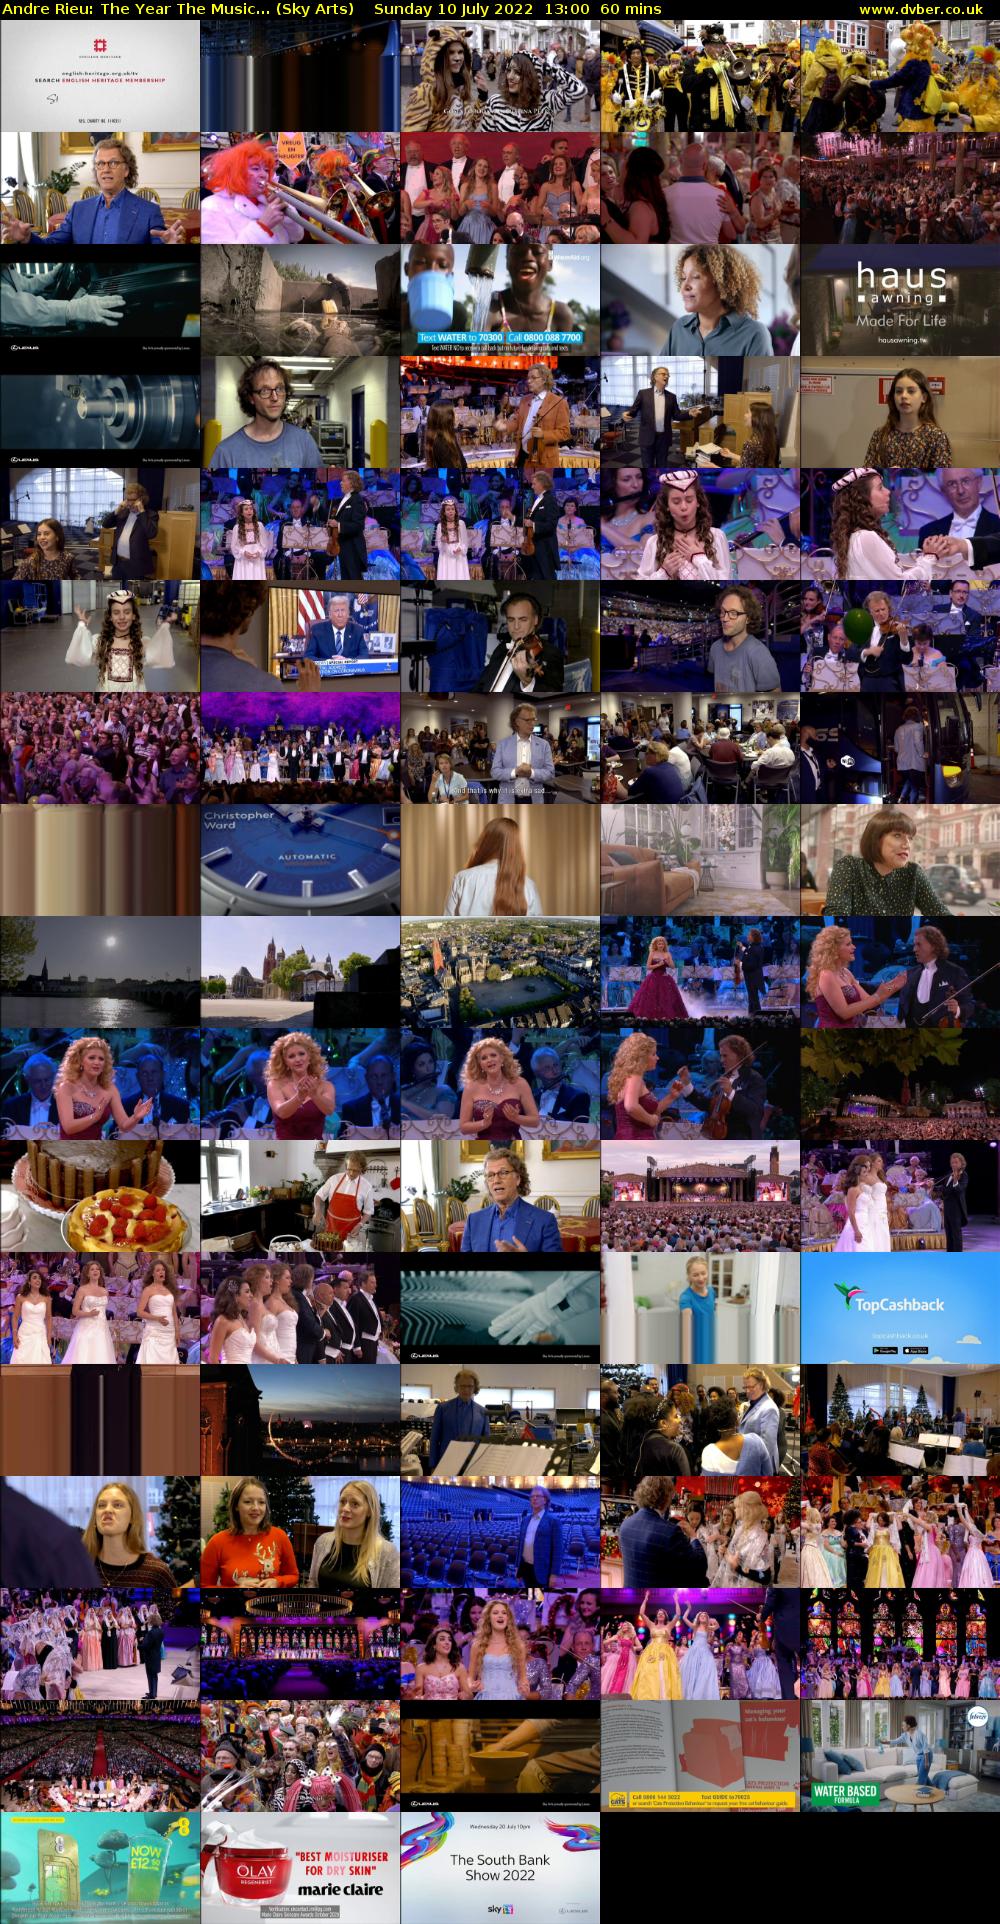 Andre Rieu: The Year The Music... (Sky Arts) Sunday 10 July 2022 13:00 - 14:00